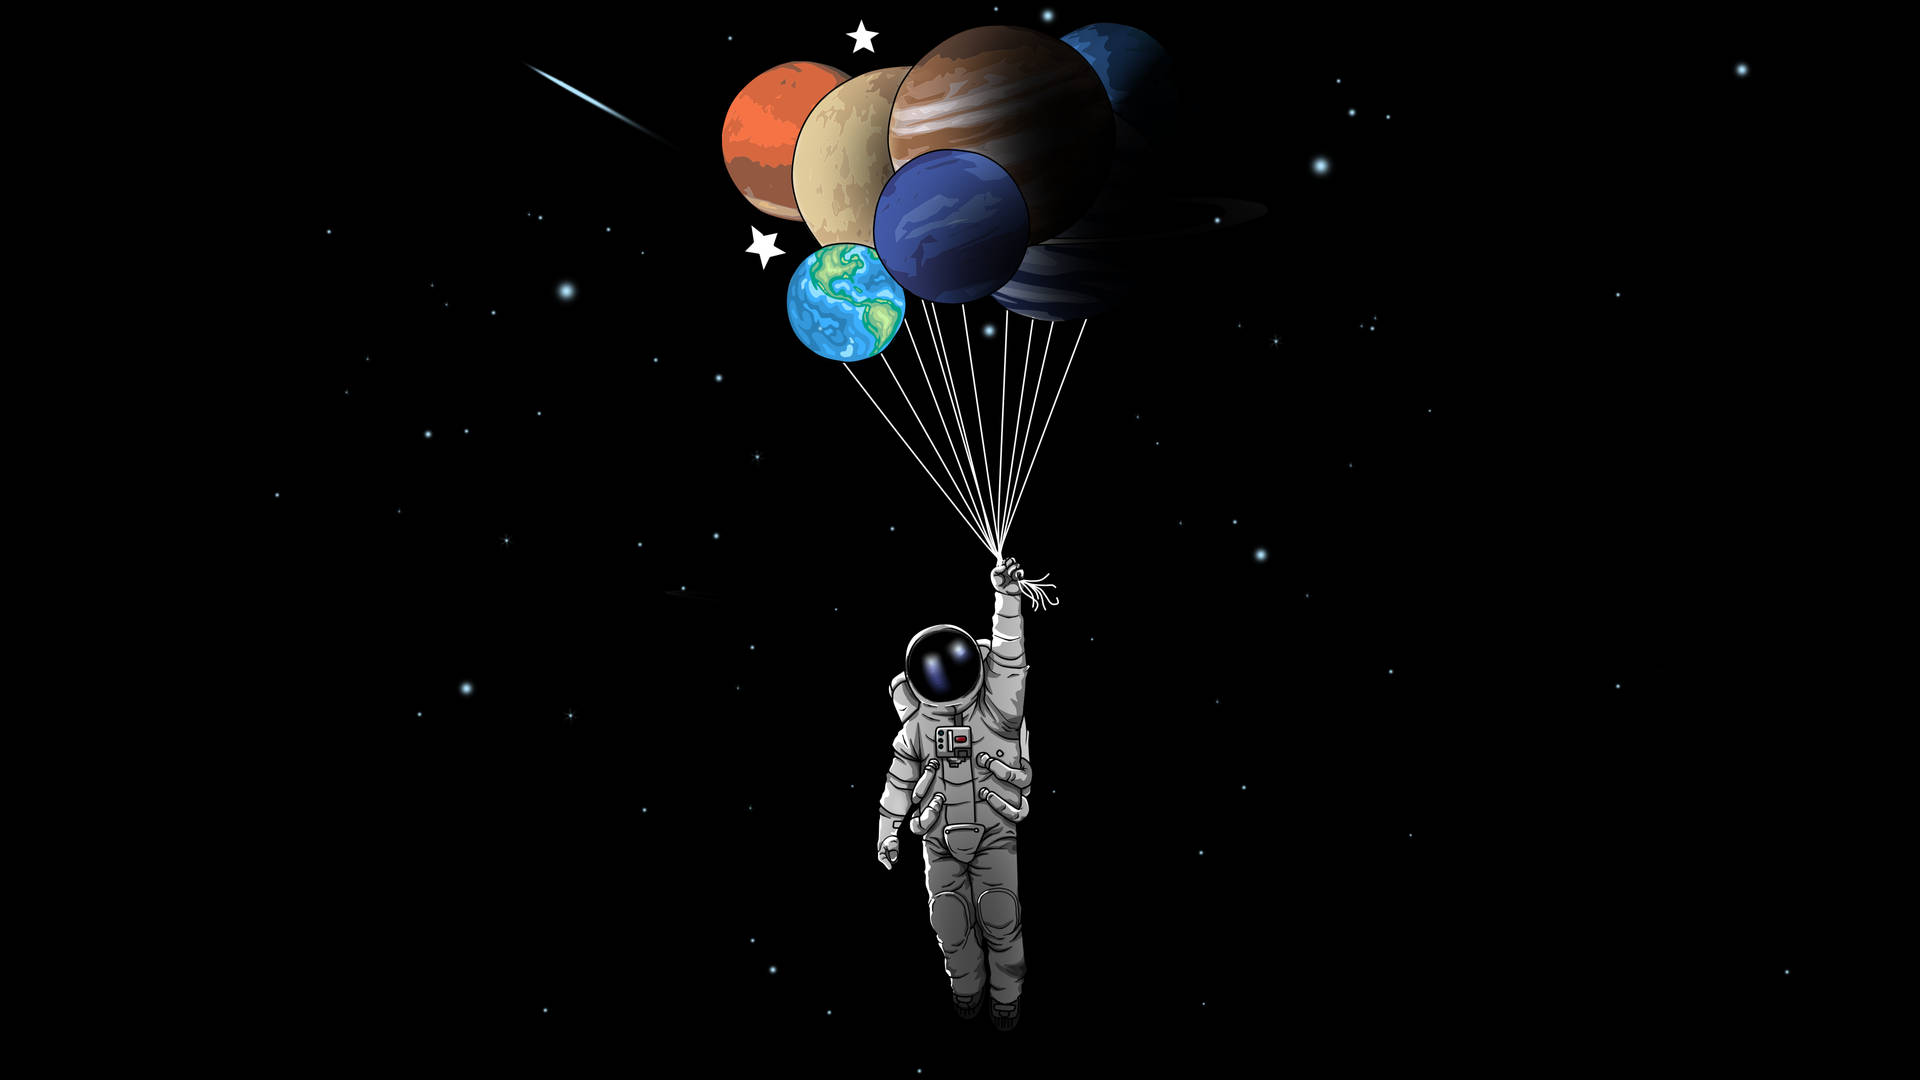 4k Astronaut With Planet Balloons